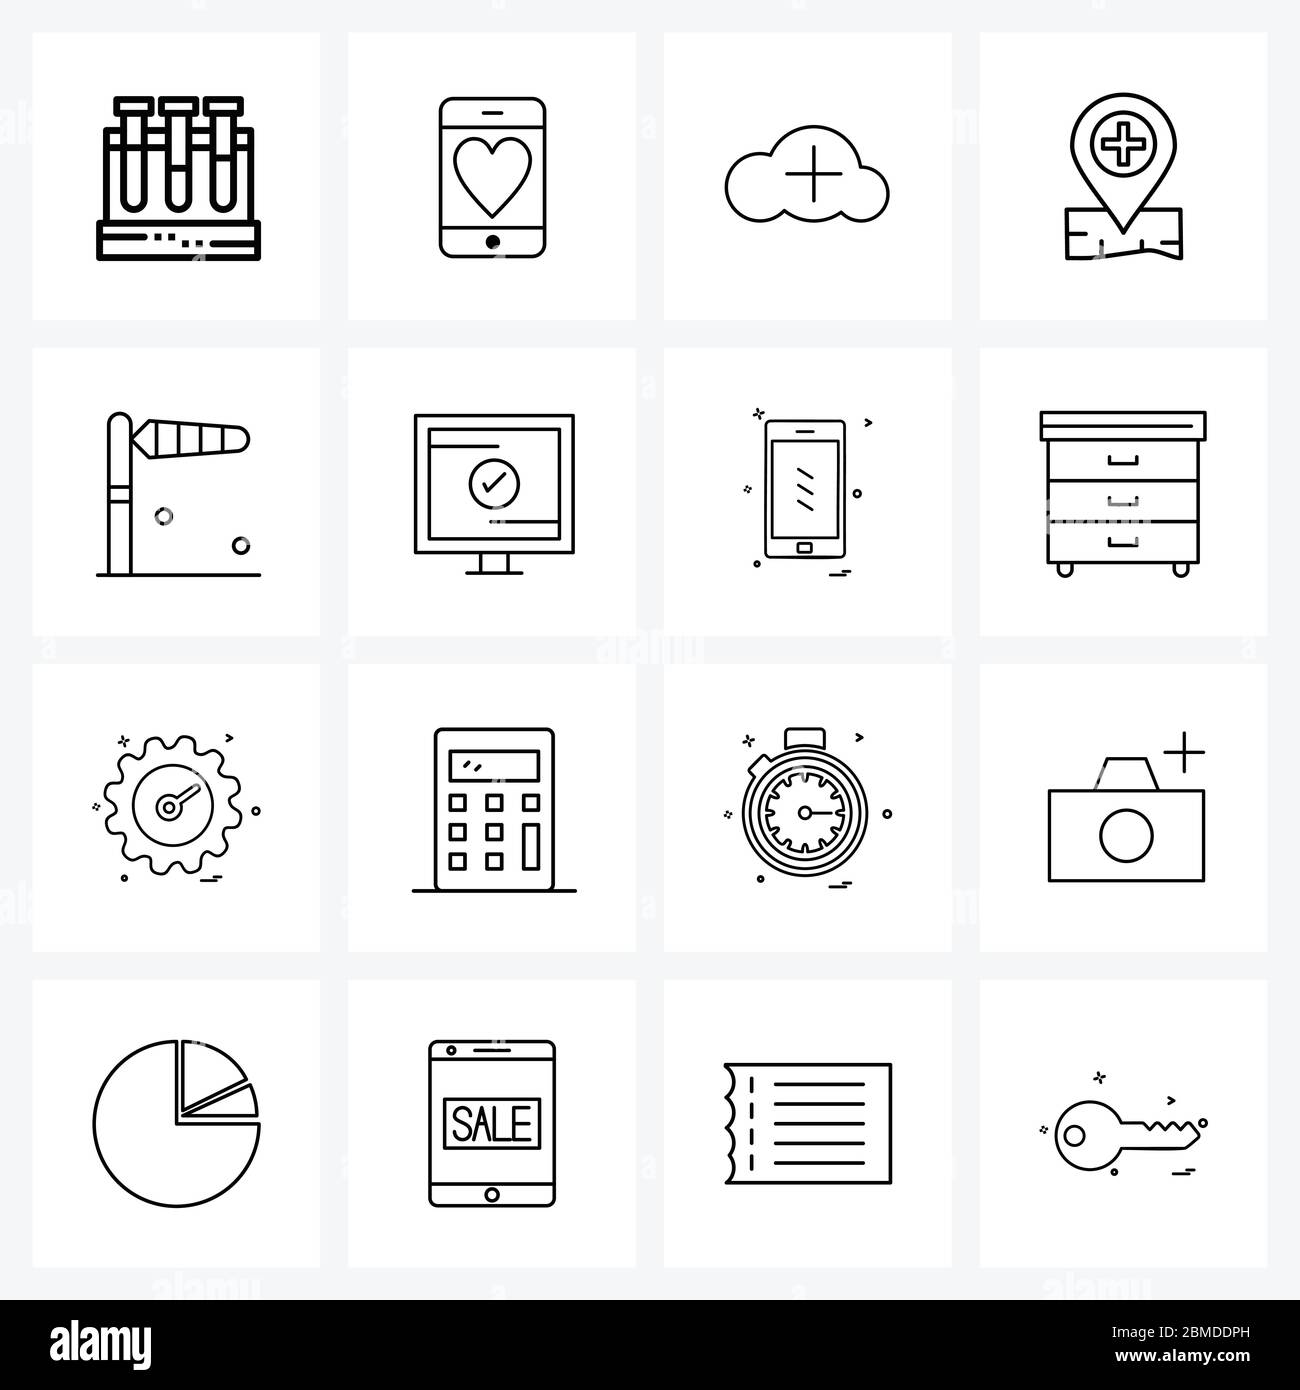 16 Editable Vector Line Icons and Modern Symbols of map, hospital, love, medical, network Vector Illustration Stock Vector